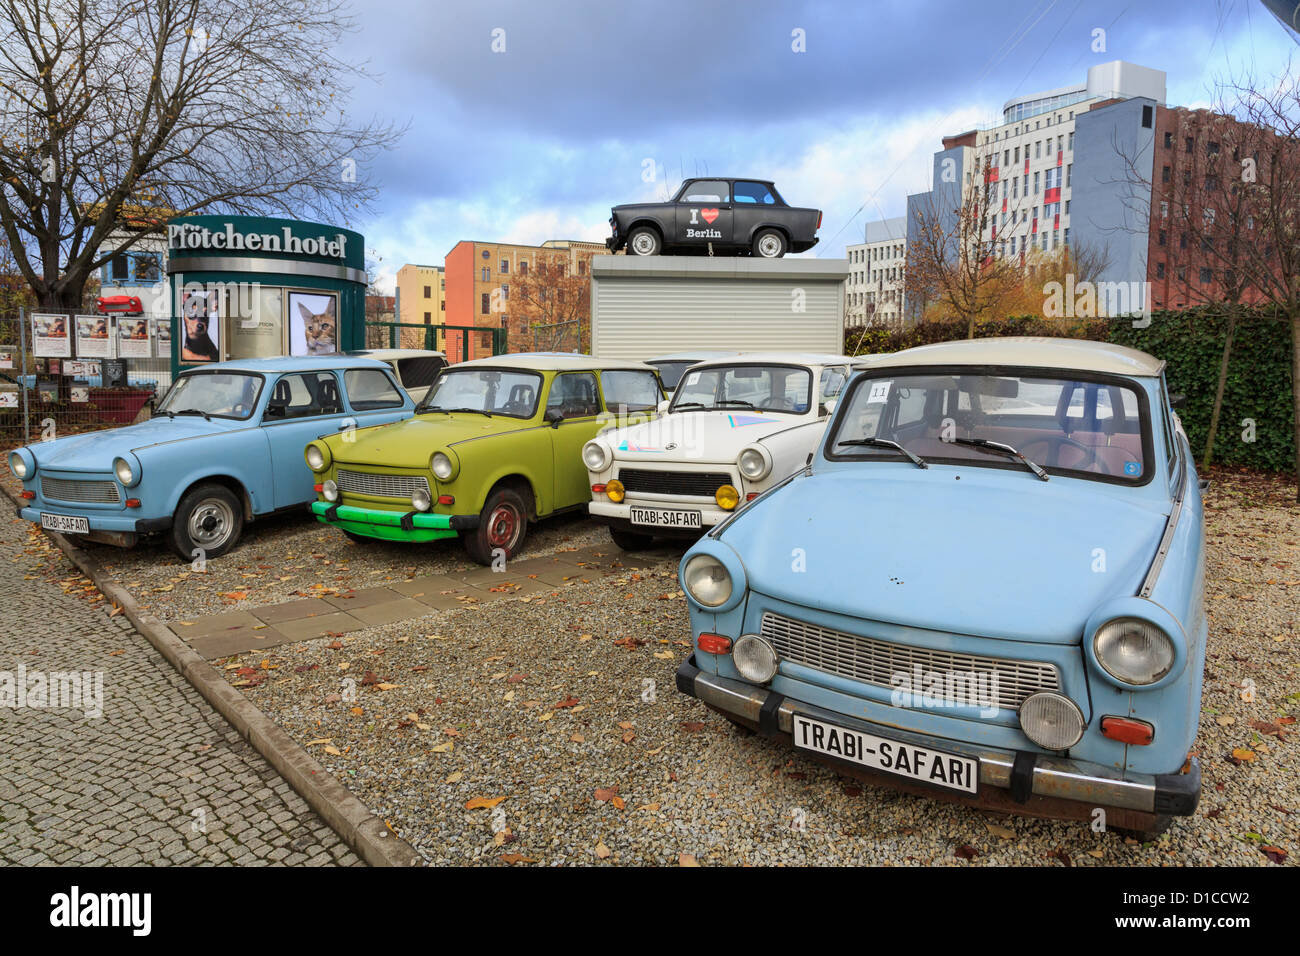 Old Trabi safari Trabant cars used for city sightseeing tours in Berlin, Germany Stock Photo